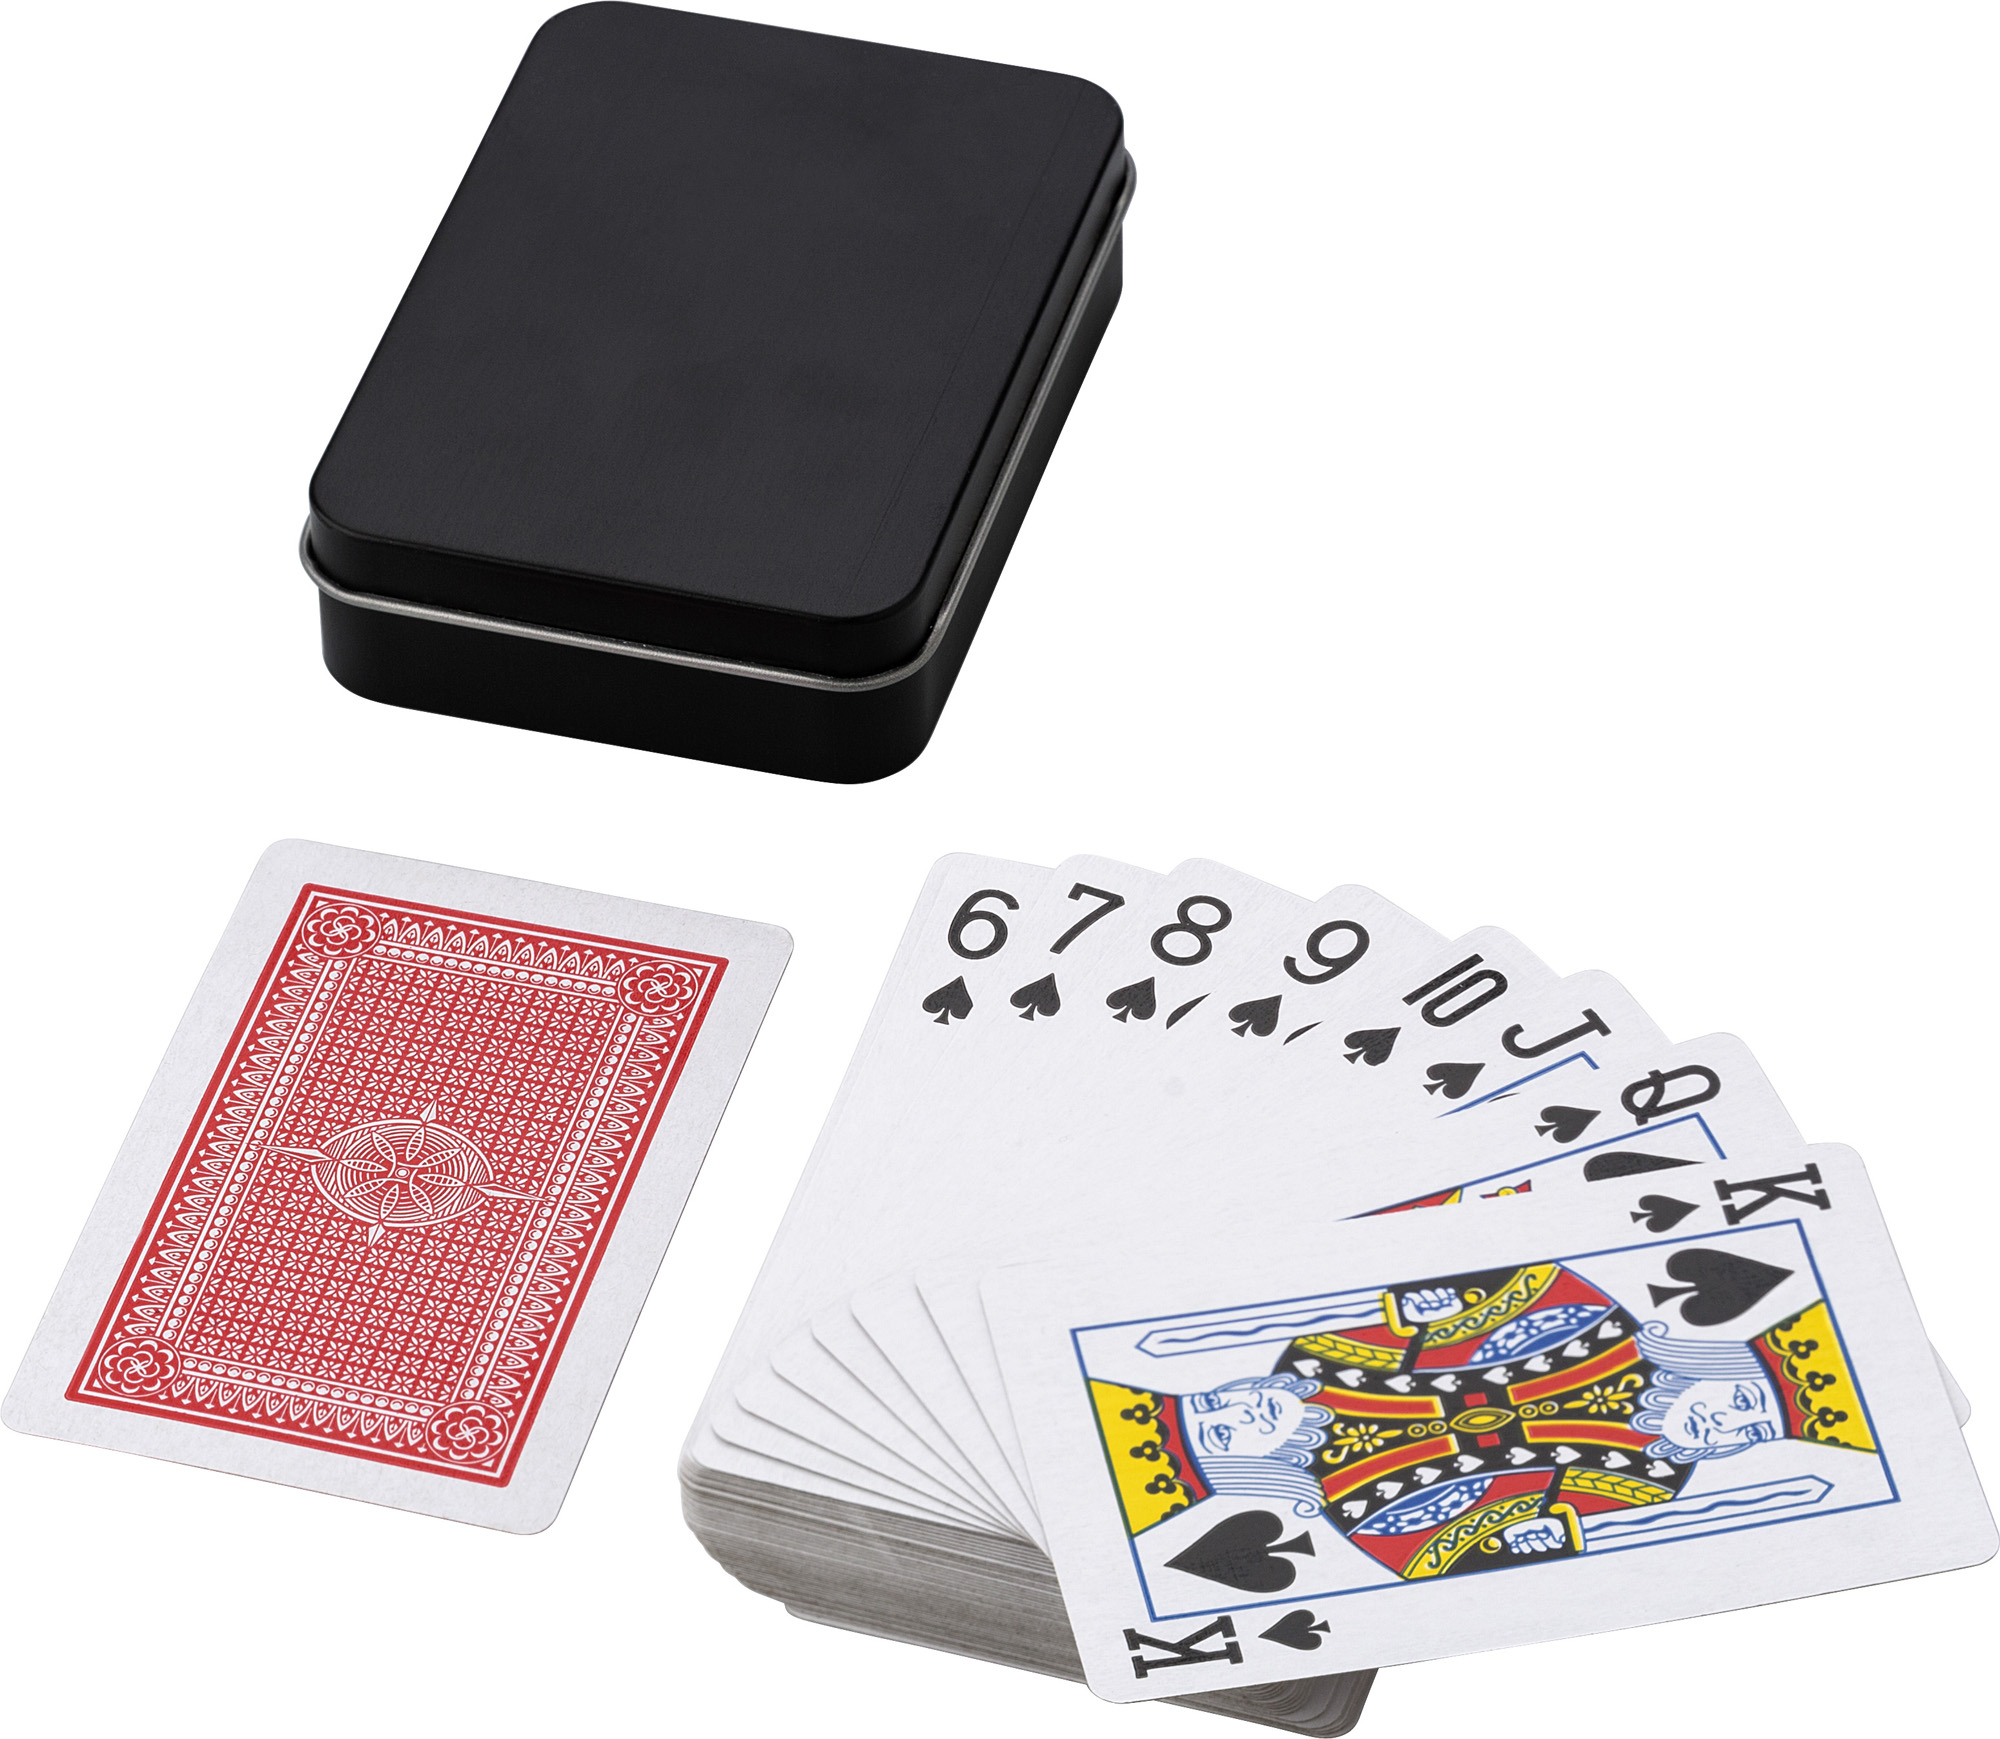 000000771596 001999999 3d045 rgt pro01 2022 fal - Playing Cards In Metal Tin